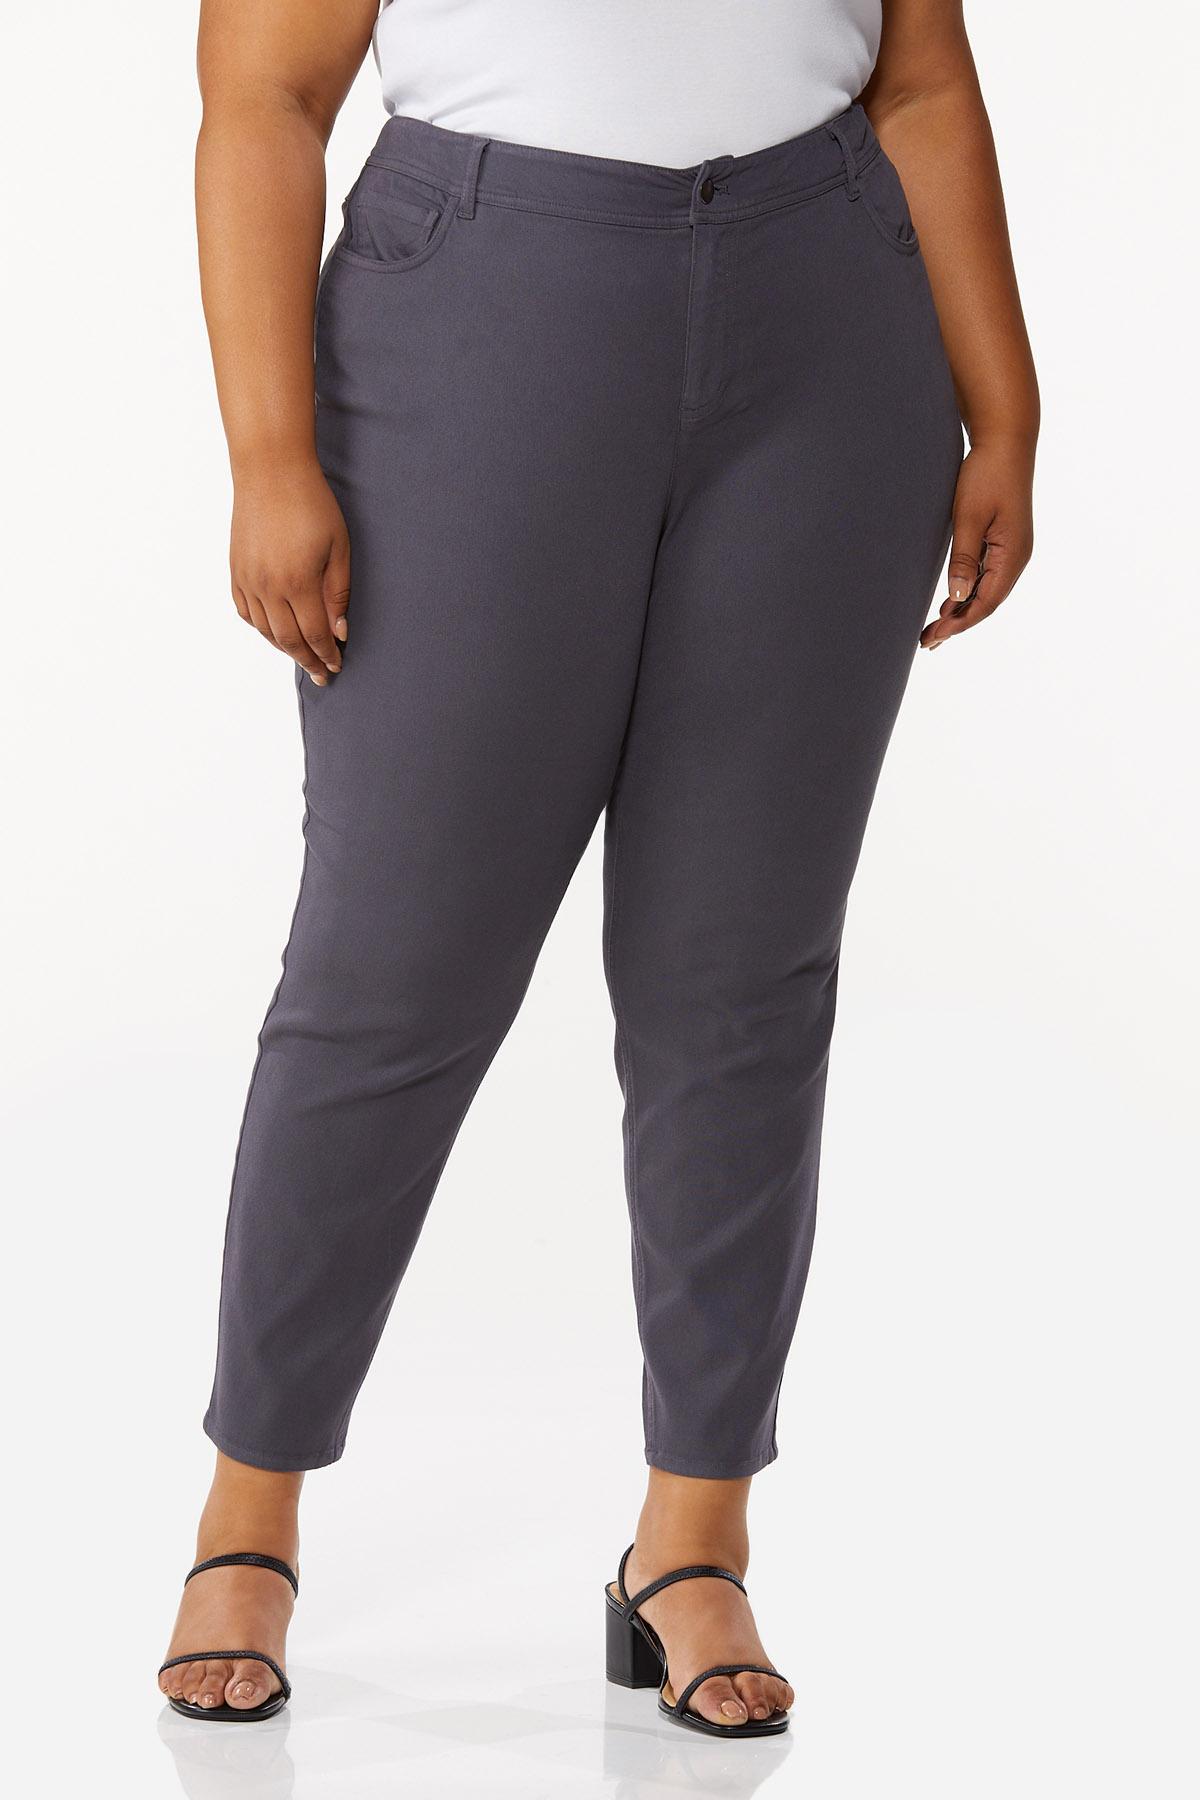 Plus Size Colored Skinny Pants